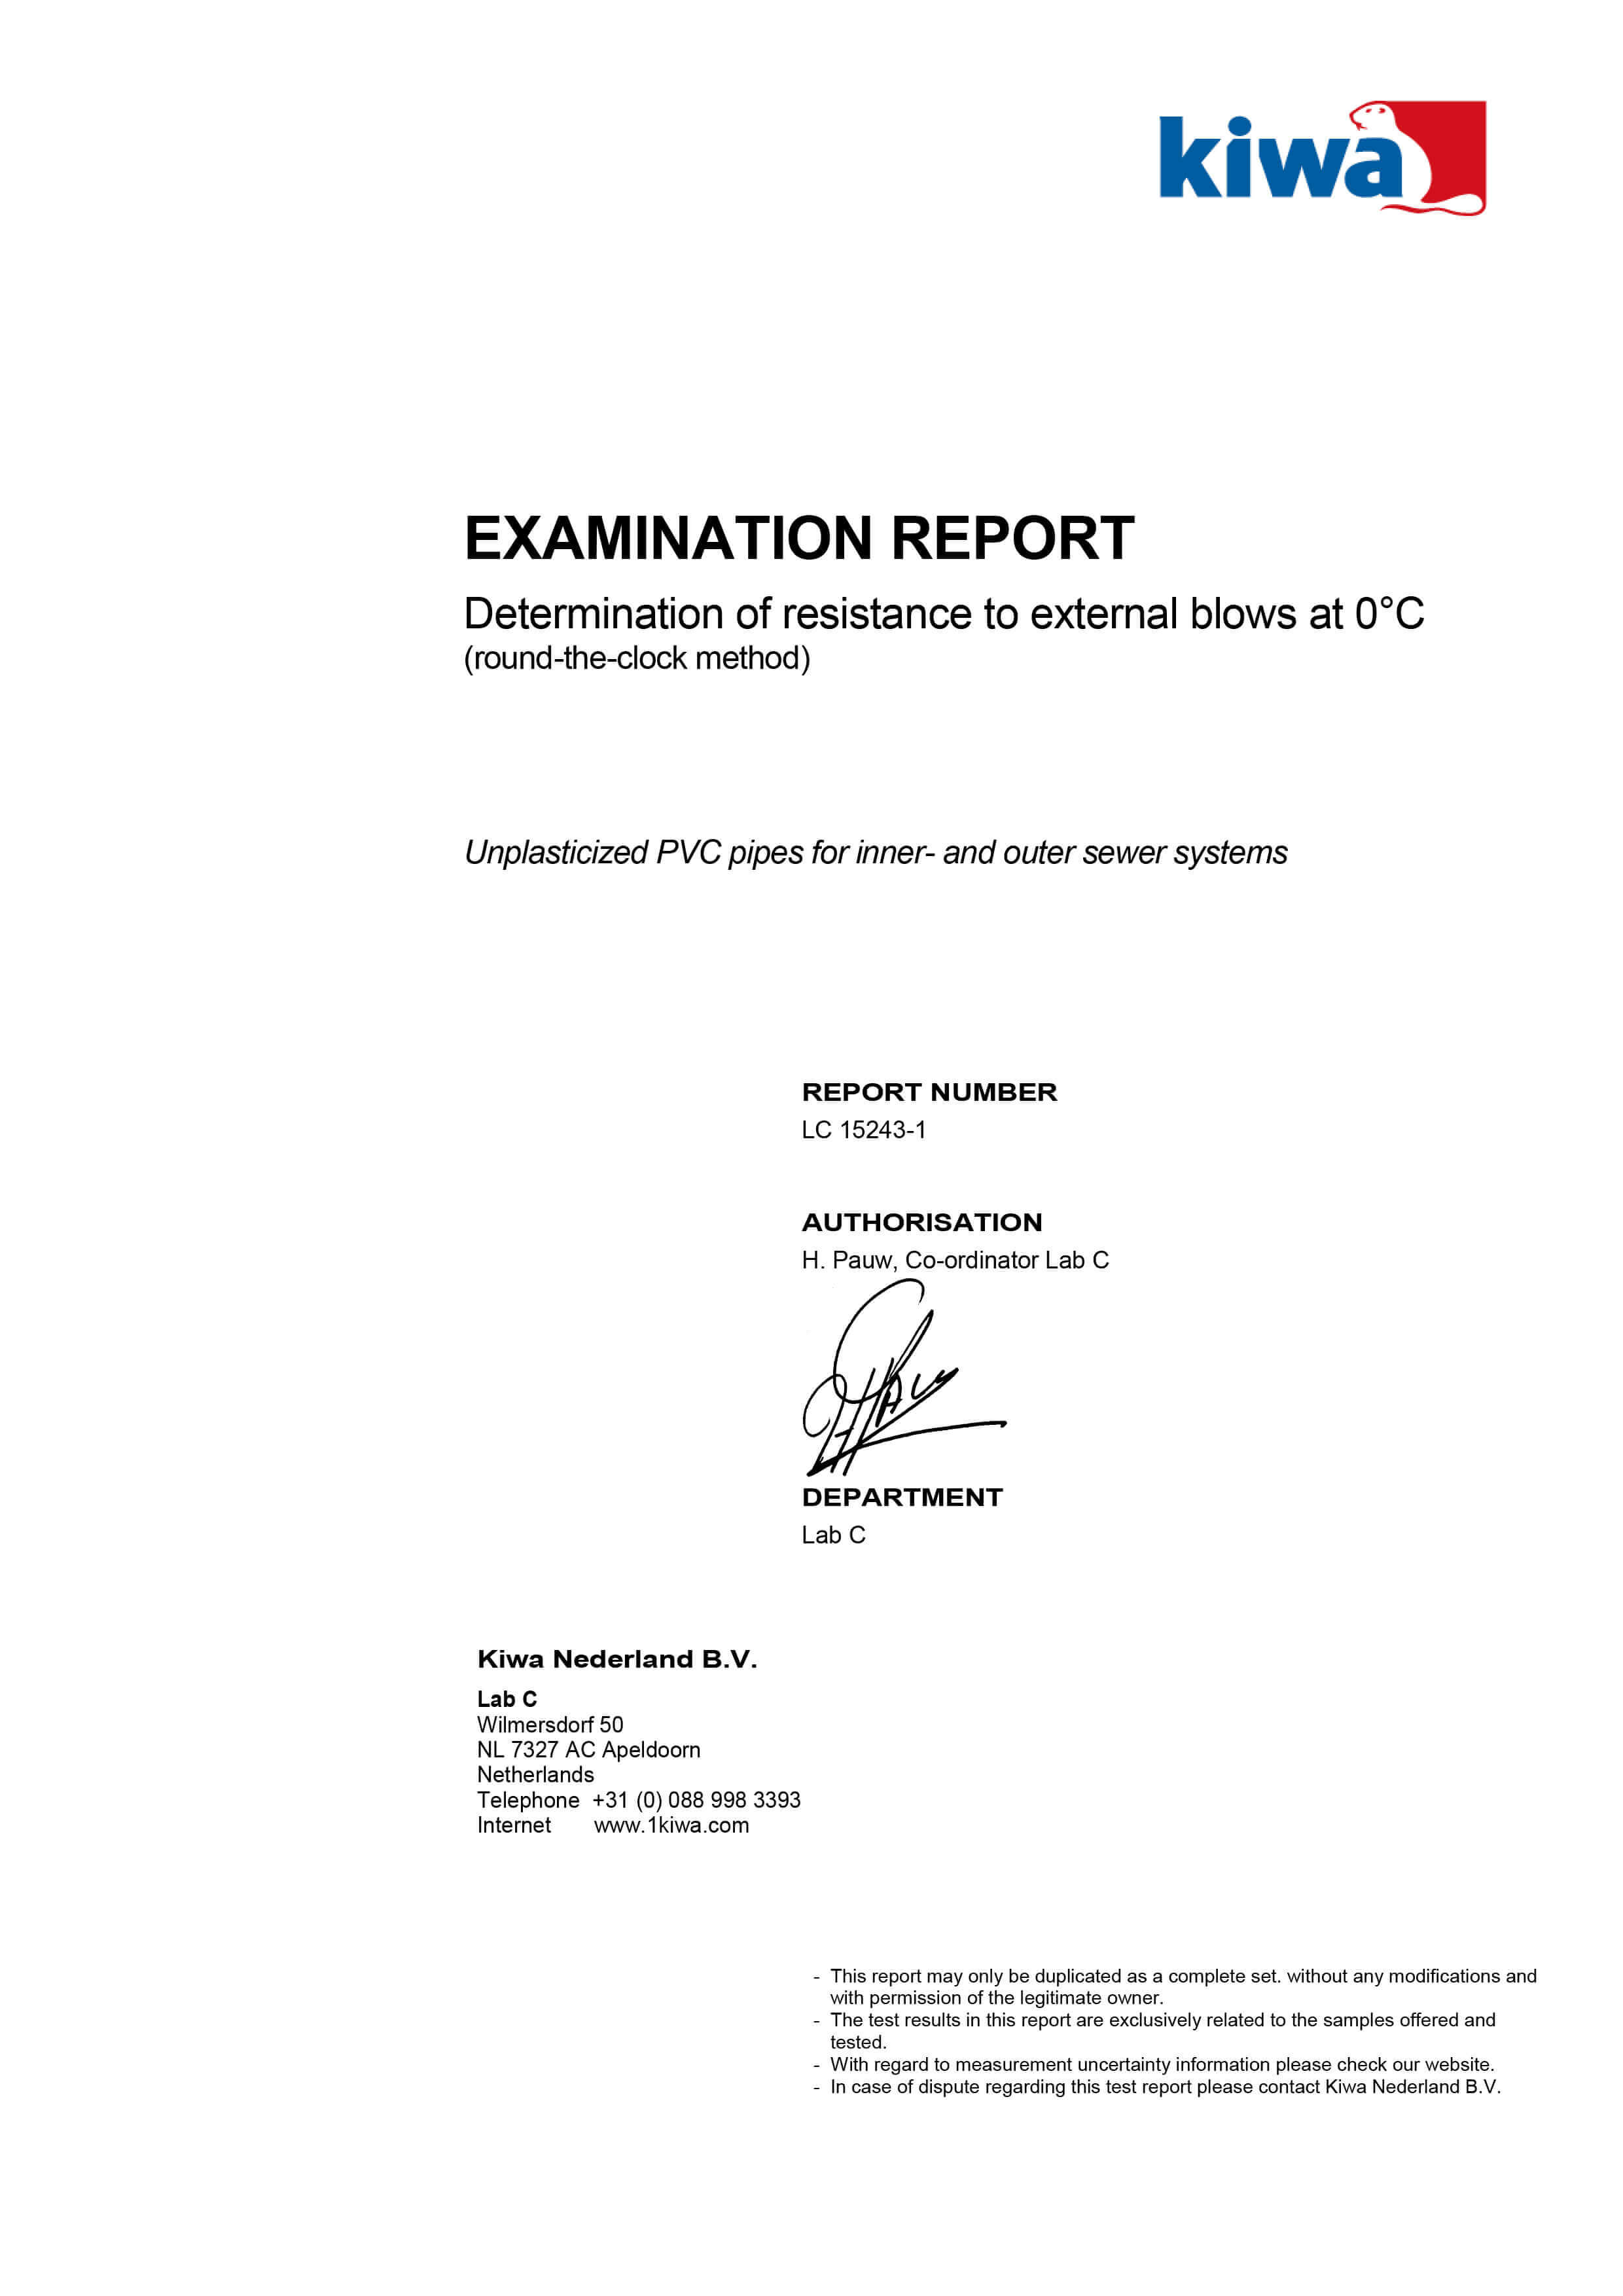 Haykal Plast Examination Report - Determination of resistance to external blows at 0 degrees C - 1